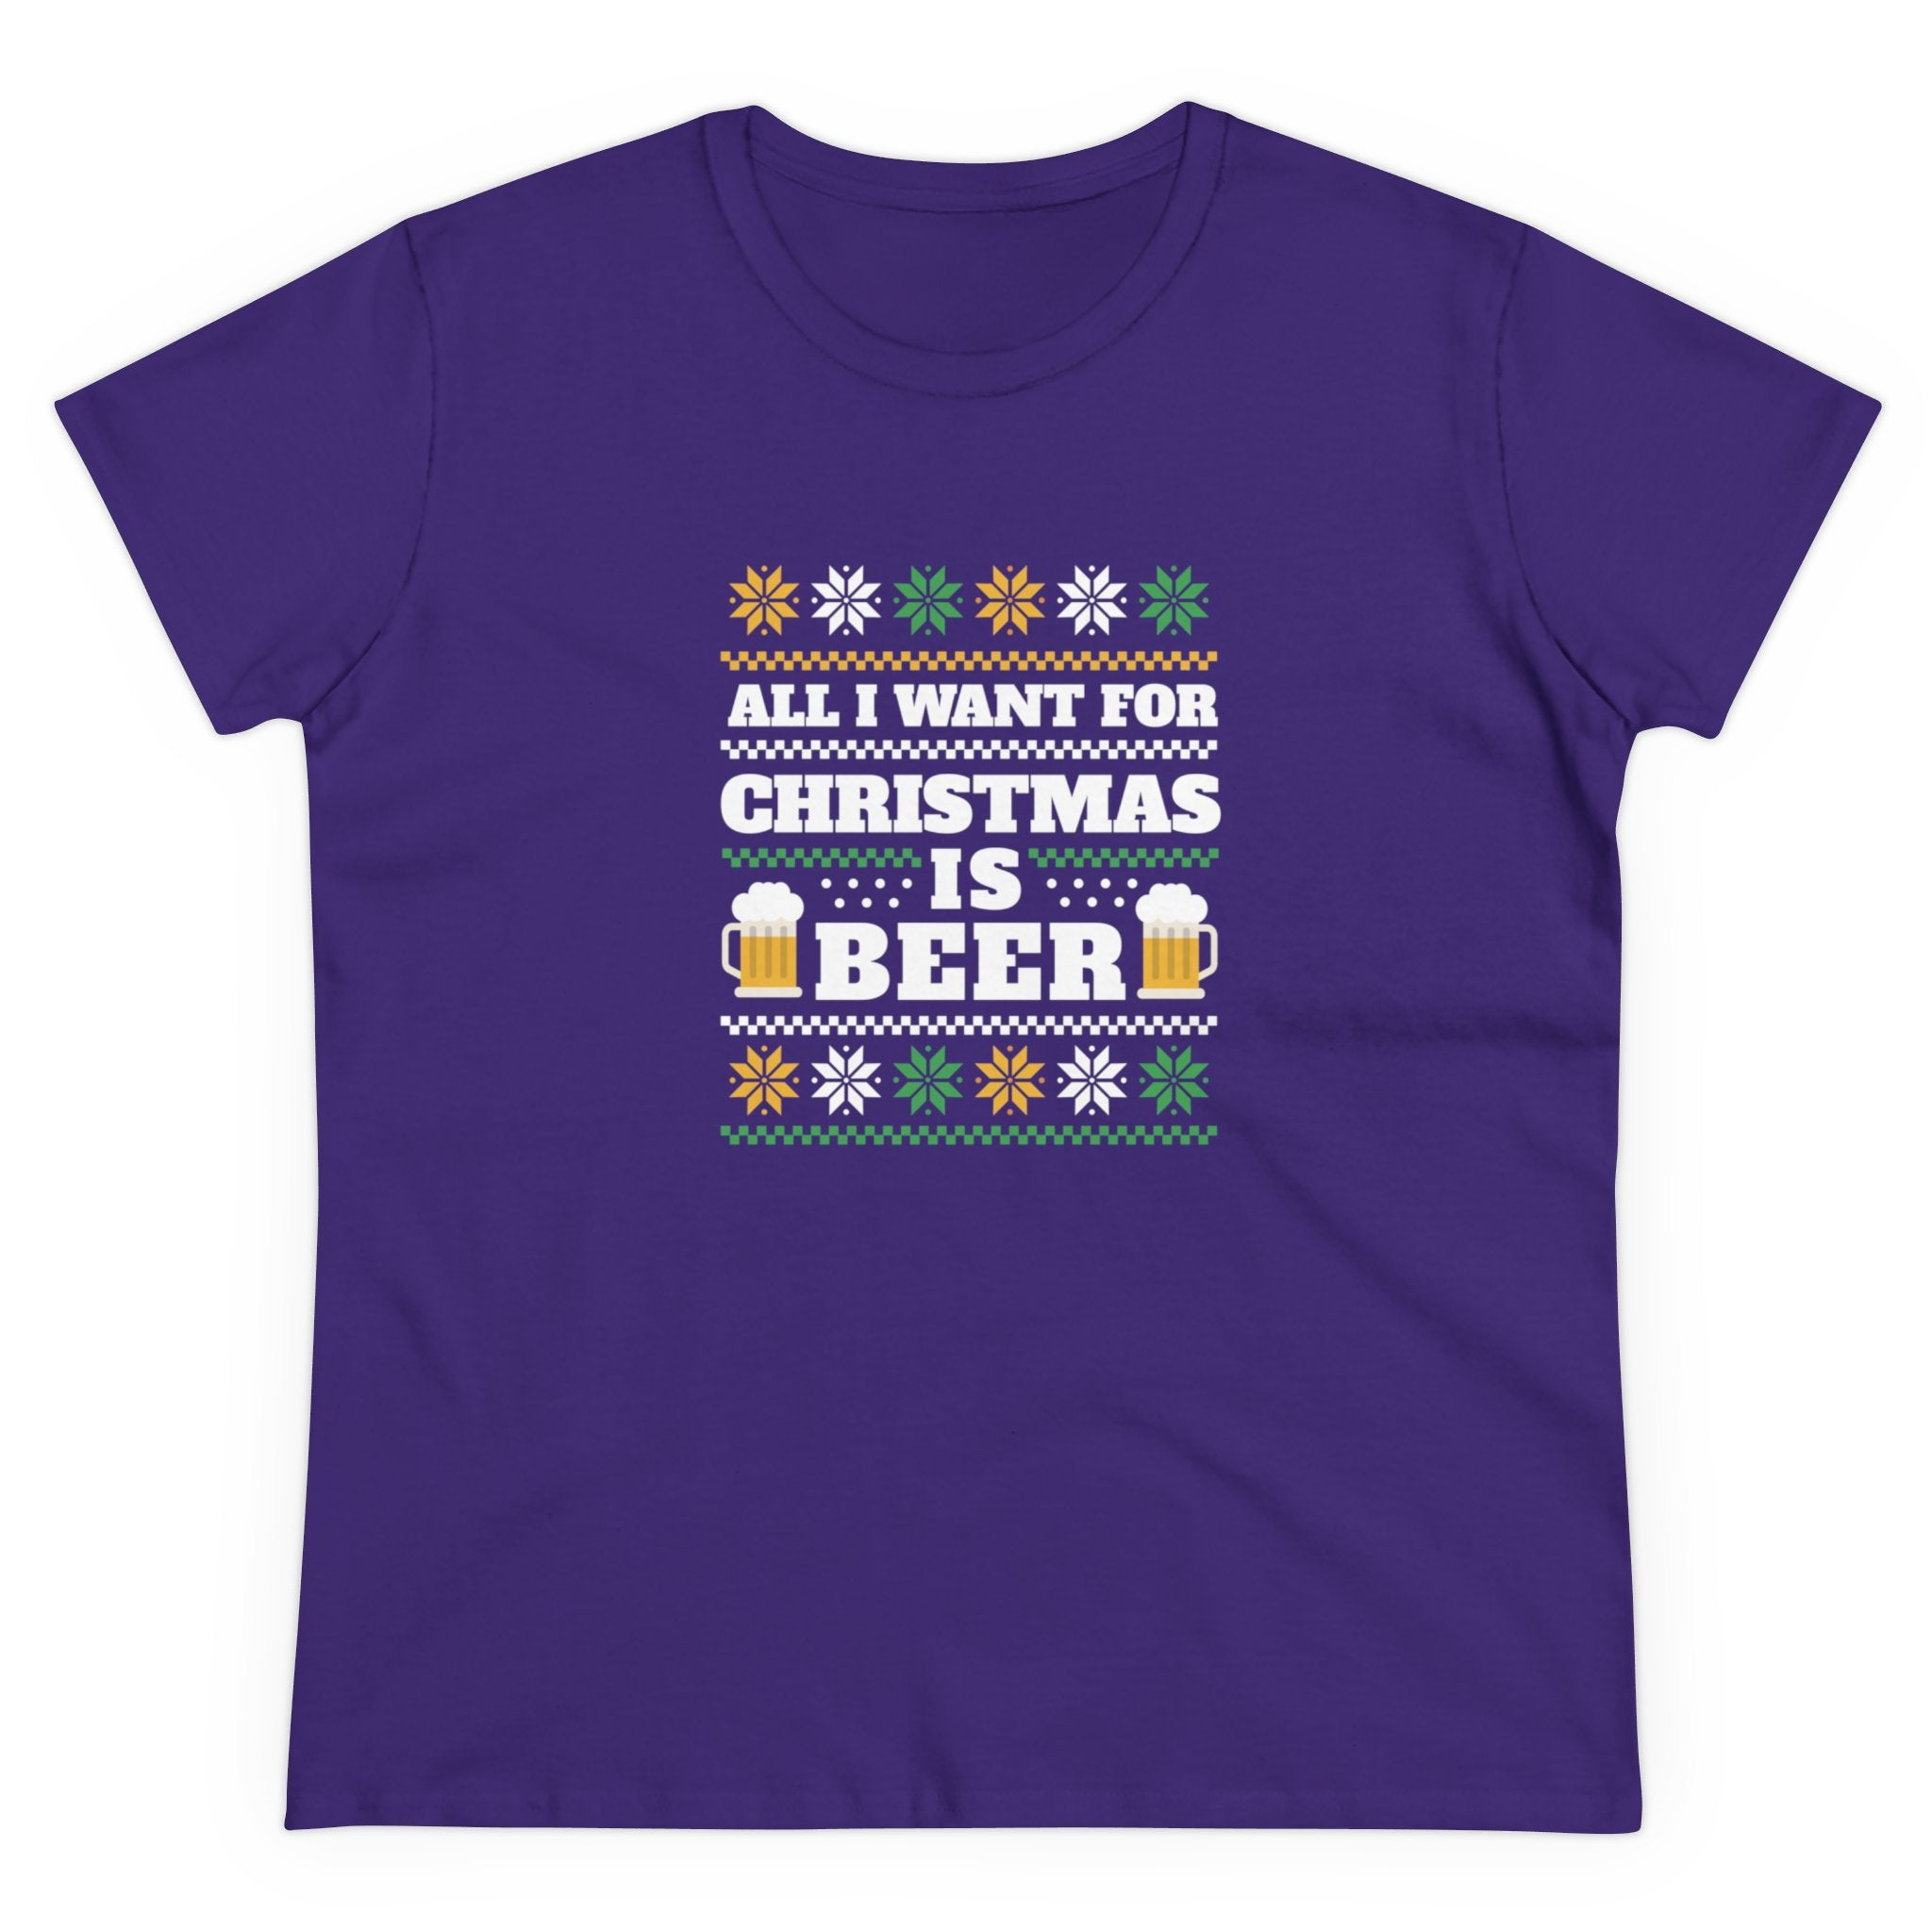 A purple Beer Ugly Sweater - Women's Tee featuring the text "All I want for Christmas is Beer," surrounded by festive patterns and images of beer mugs. Made from pre-shrunk cotton, this shirt offers comfort and a touch of humor, perfect for embodying the spirit of a Beer Ugly Sweater in a casual style.